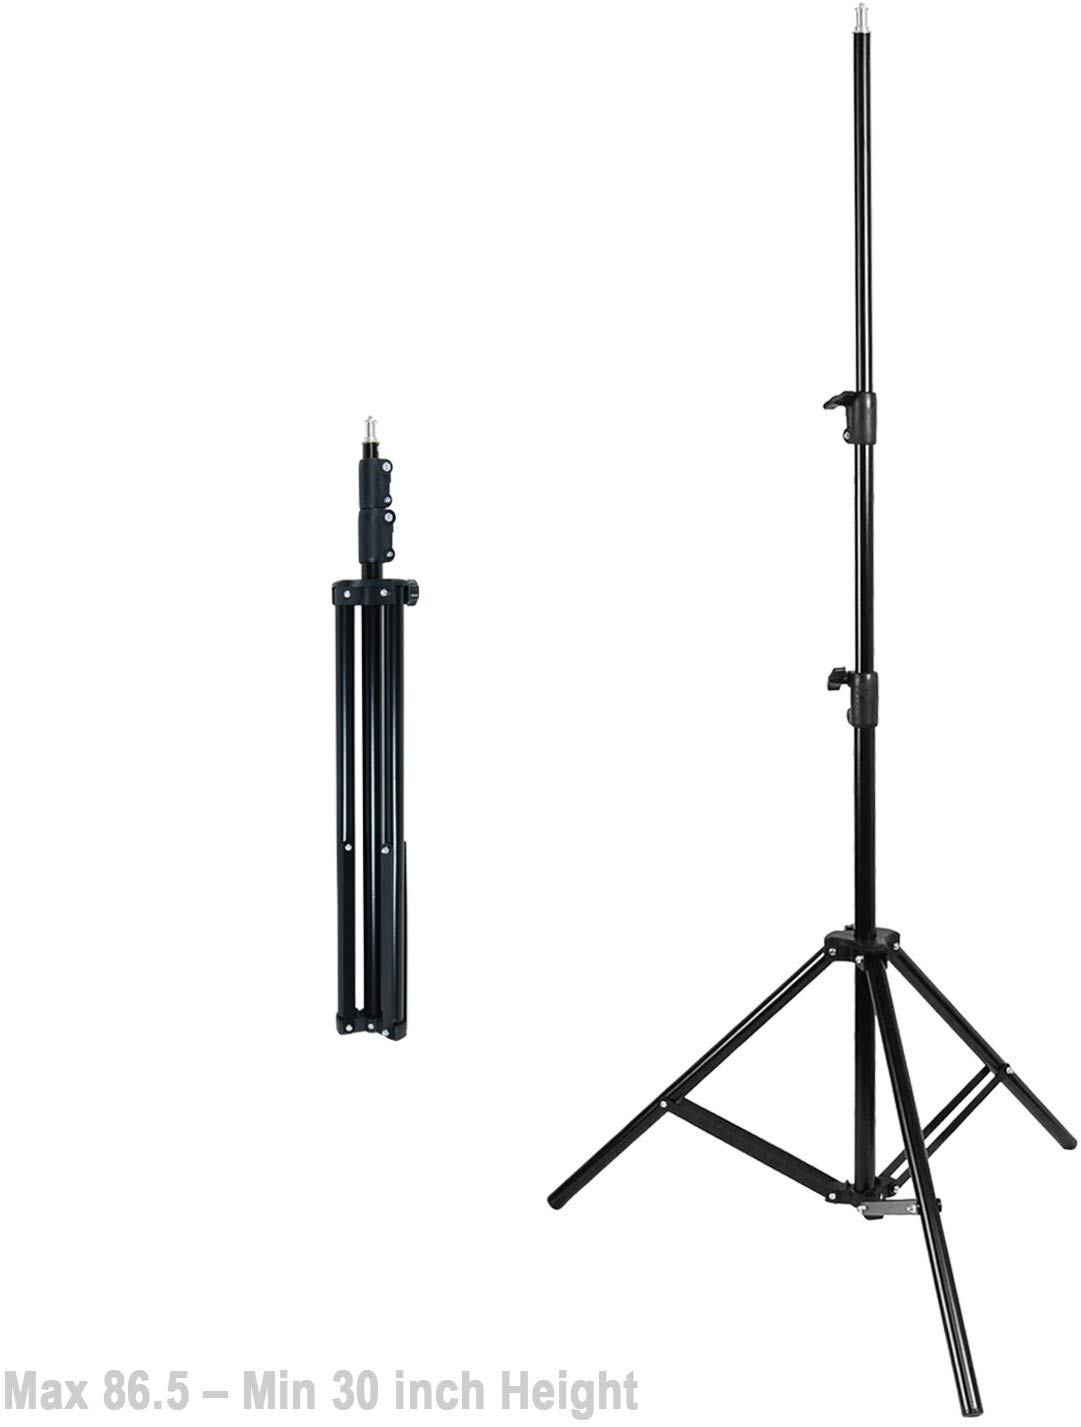 LS Photography 20 x 28 Inch Soft Box Lighting Kit with Bulb Socket, Boom Stand and Slope Arm Bar, 1200W Output Softbox Light for Video Camera Photography, Photo Portrait Studio, WMT1189 - image 5 of 7